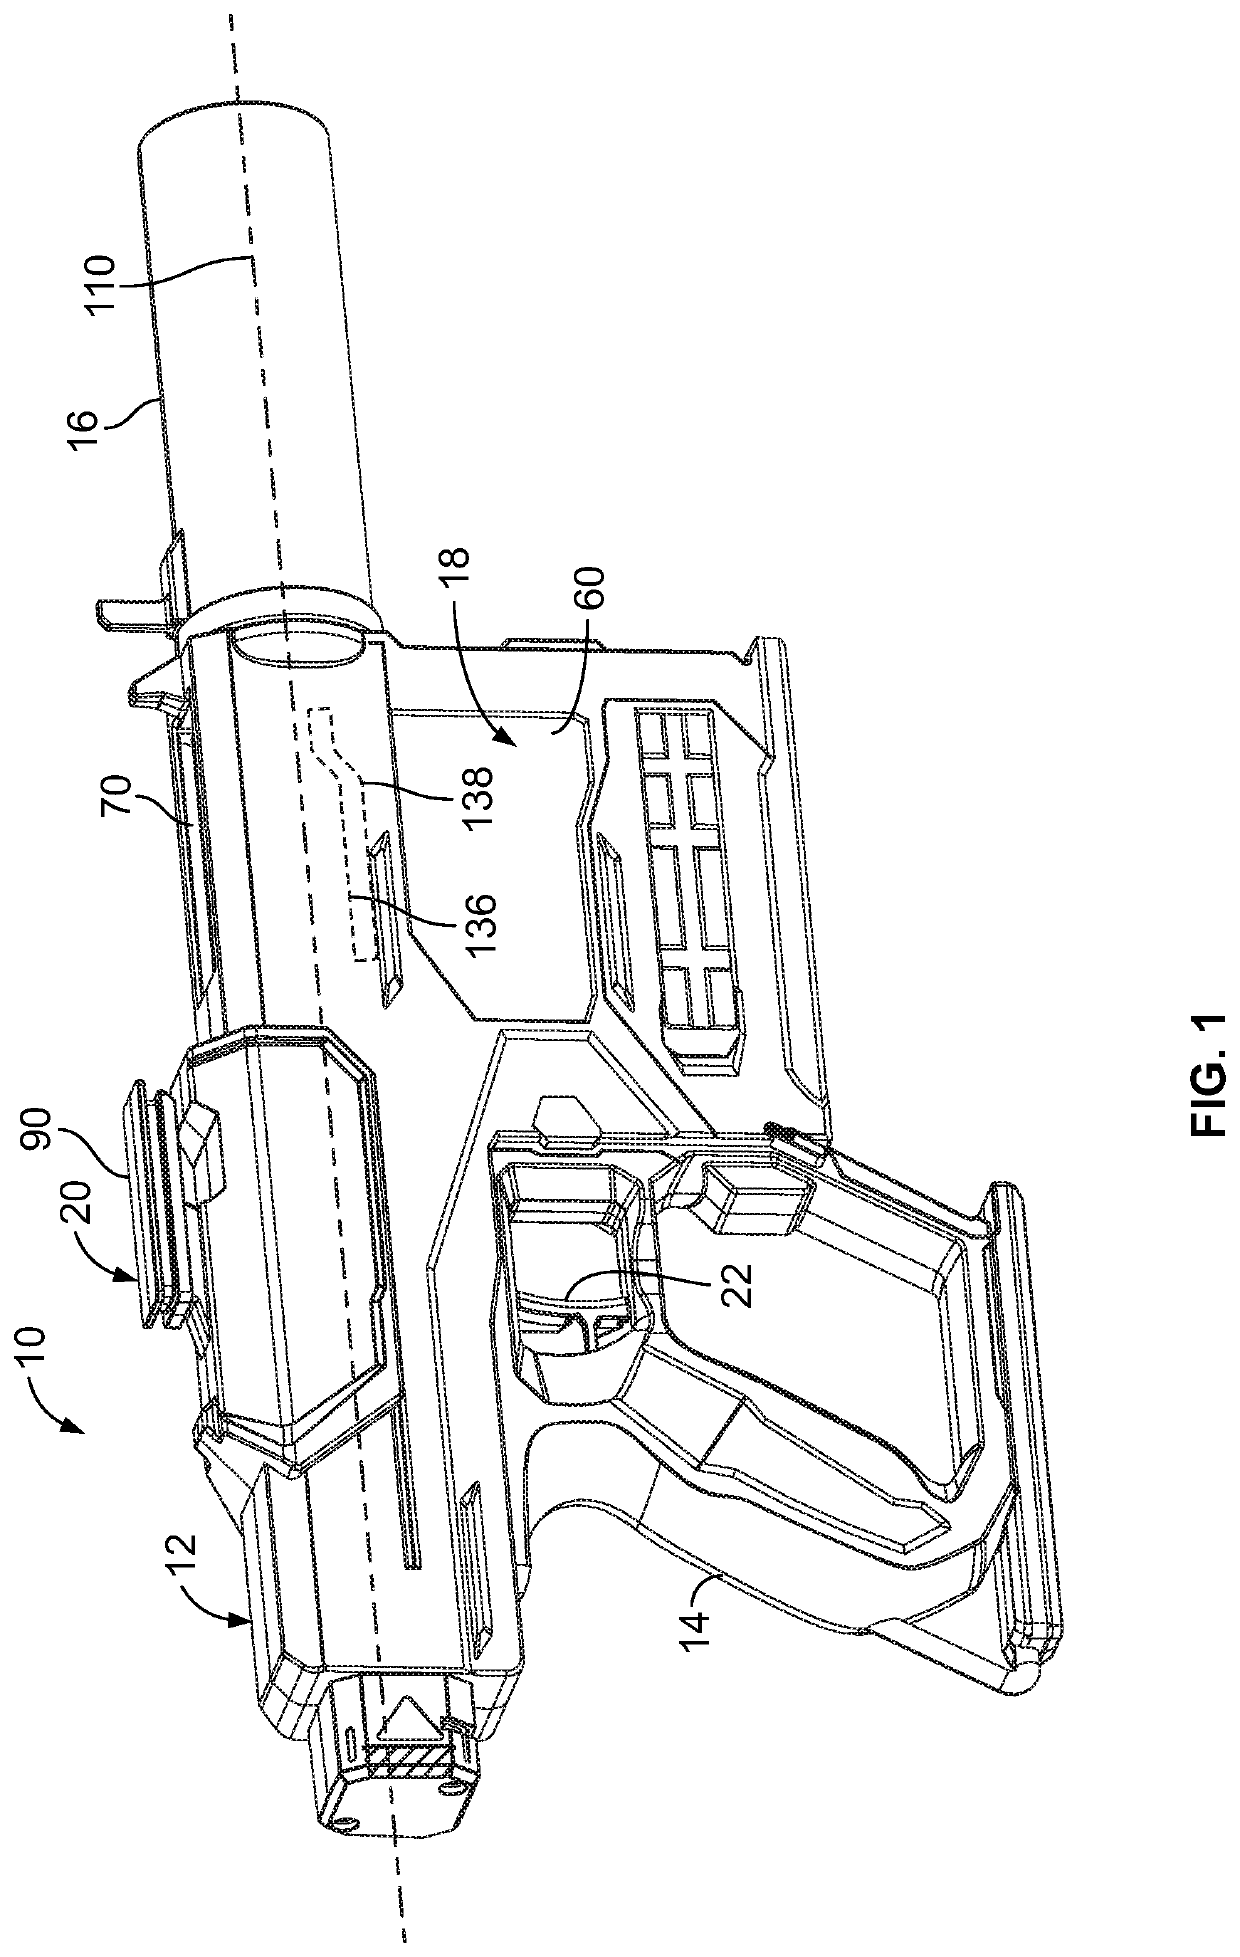 Projectile launcher apparatus with magazine